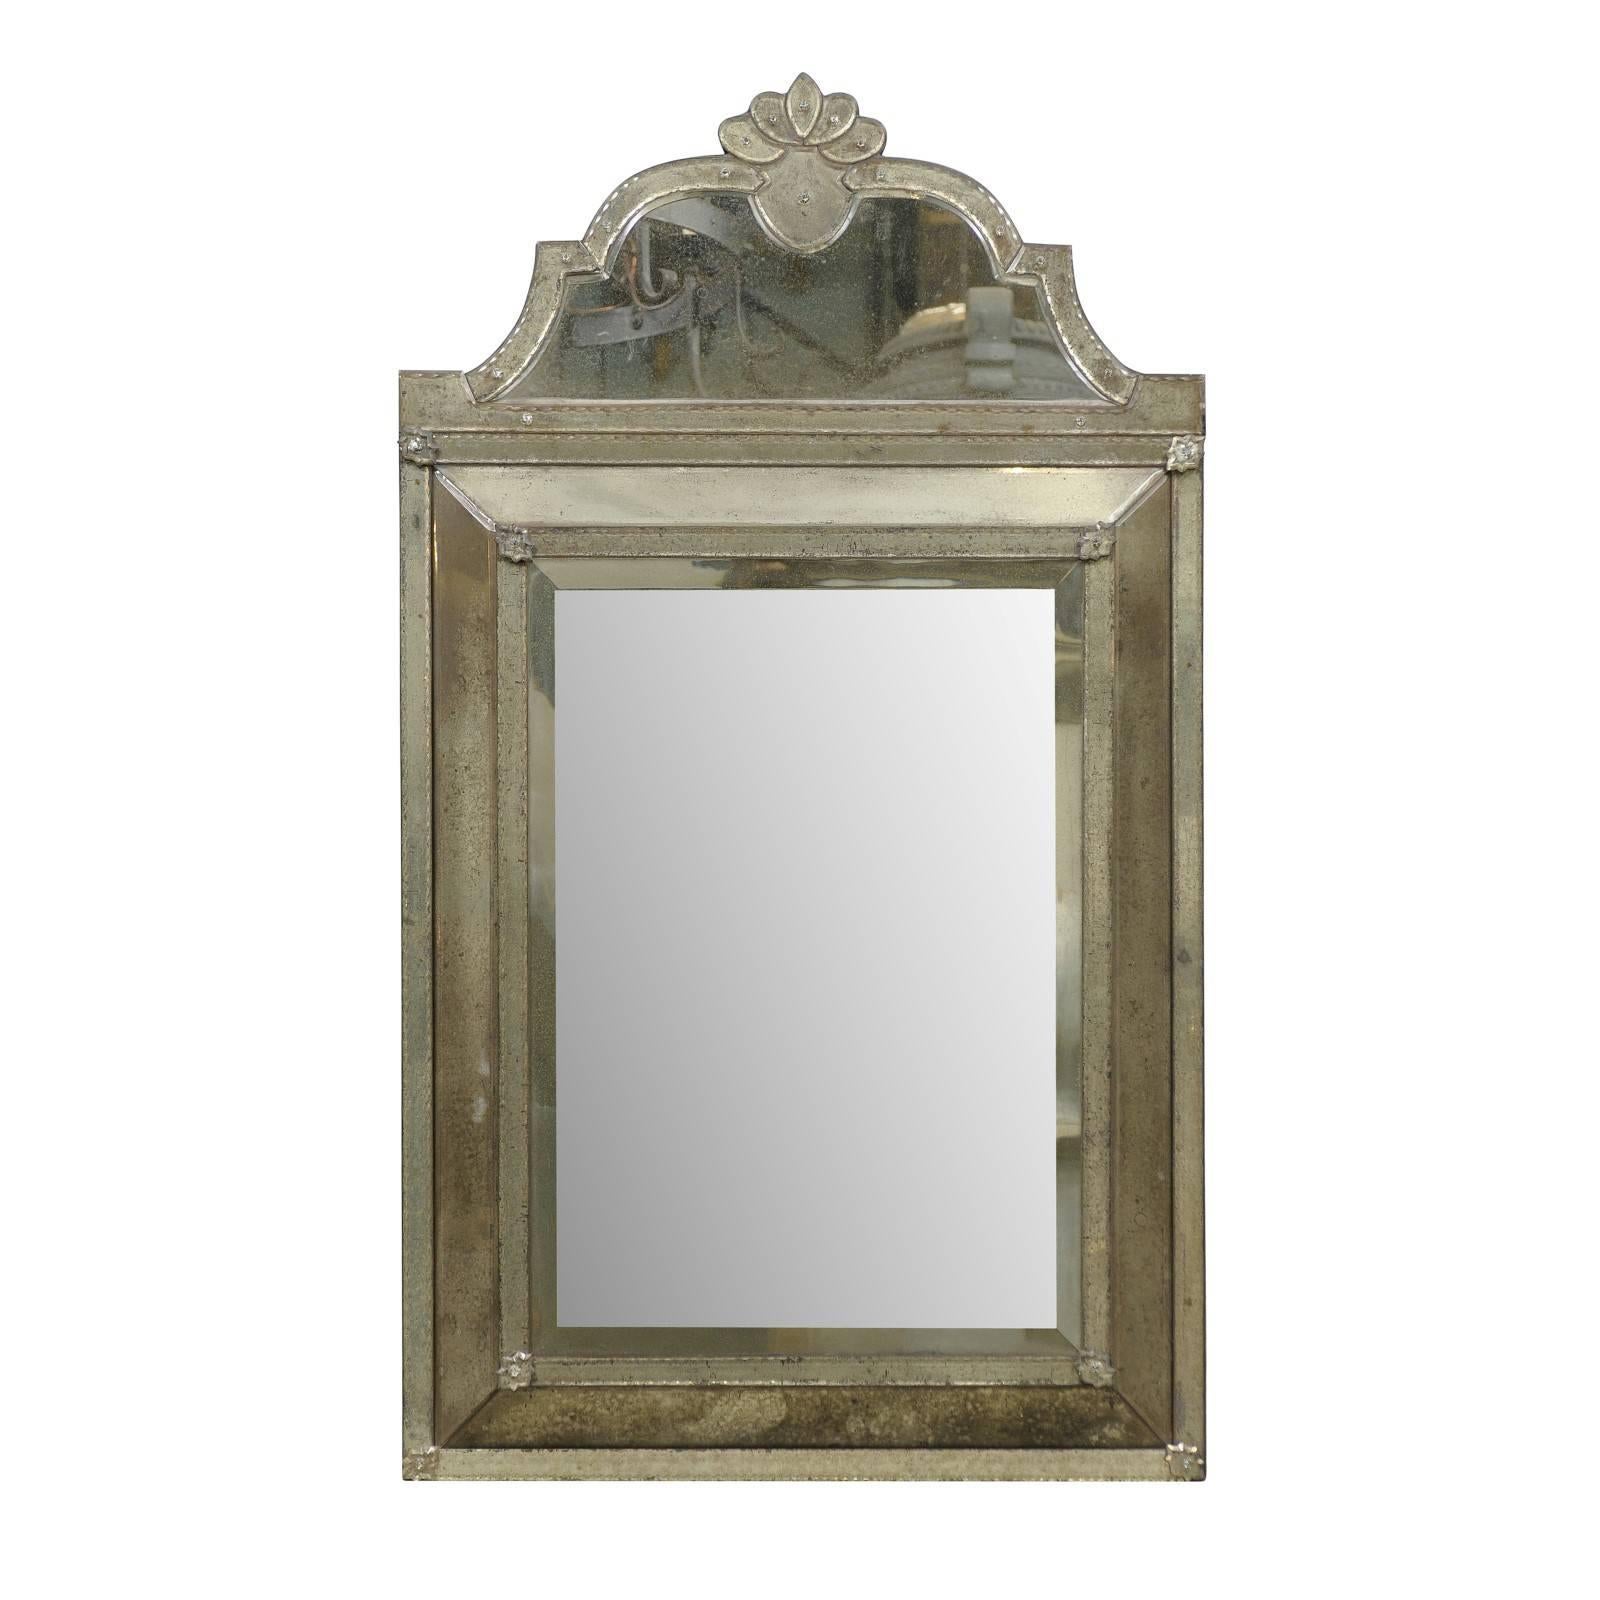 Crest Top Venetian Style Antiqued Rectangular Mirror, Handmade and Hand Silvered